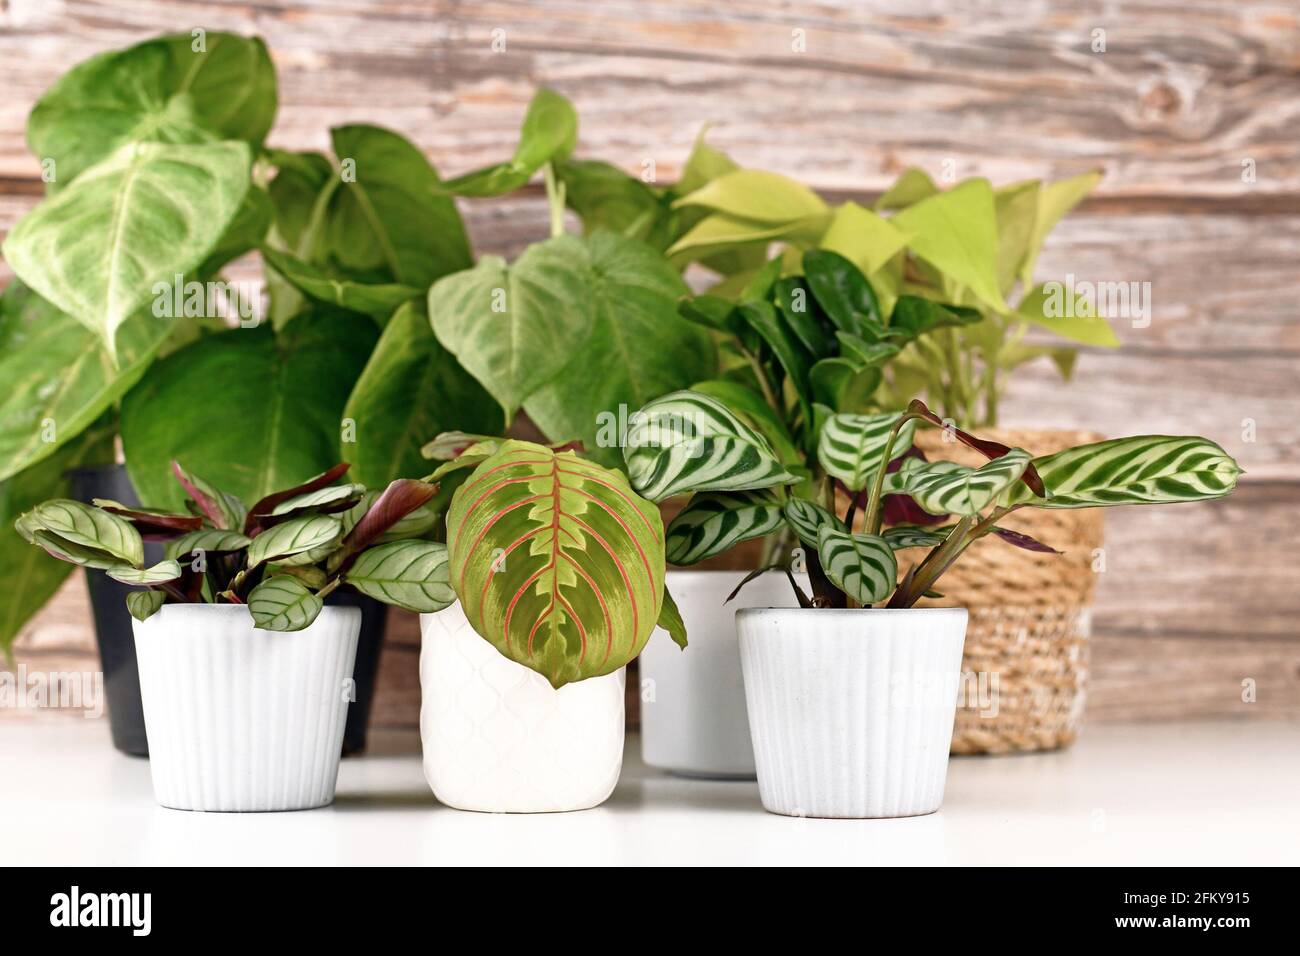 Various small tropical houseplants like Marantas and Syngonium in pots on white table Stock Photo